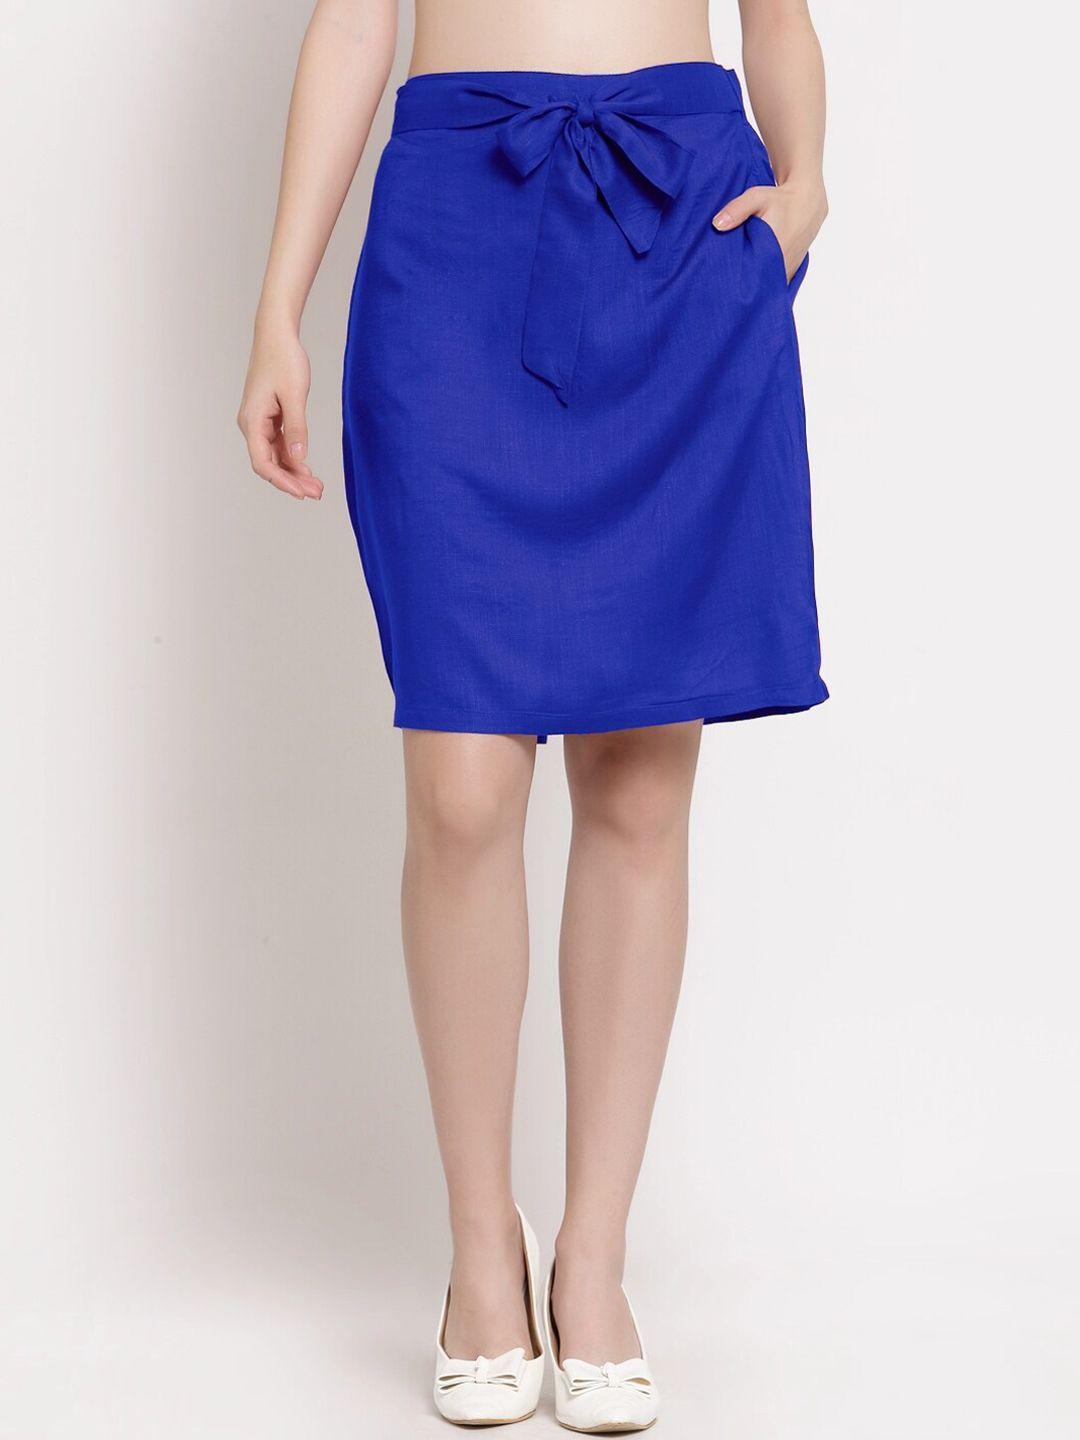 patrorna-women-navy-blue-solid-pencil-above-knee-skirts